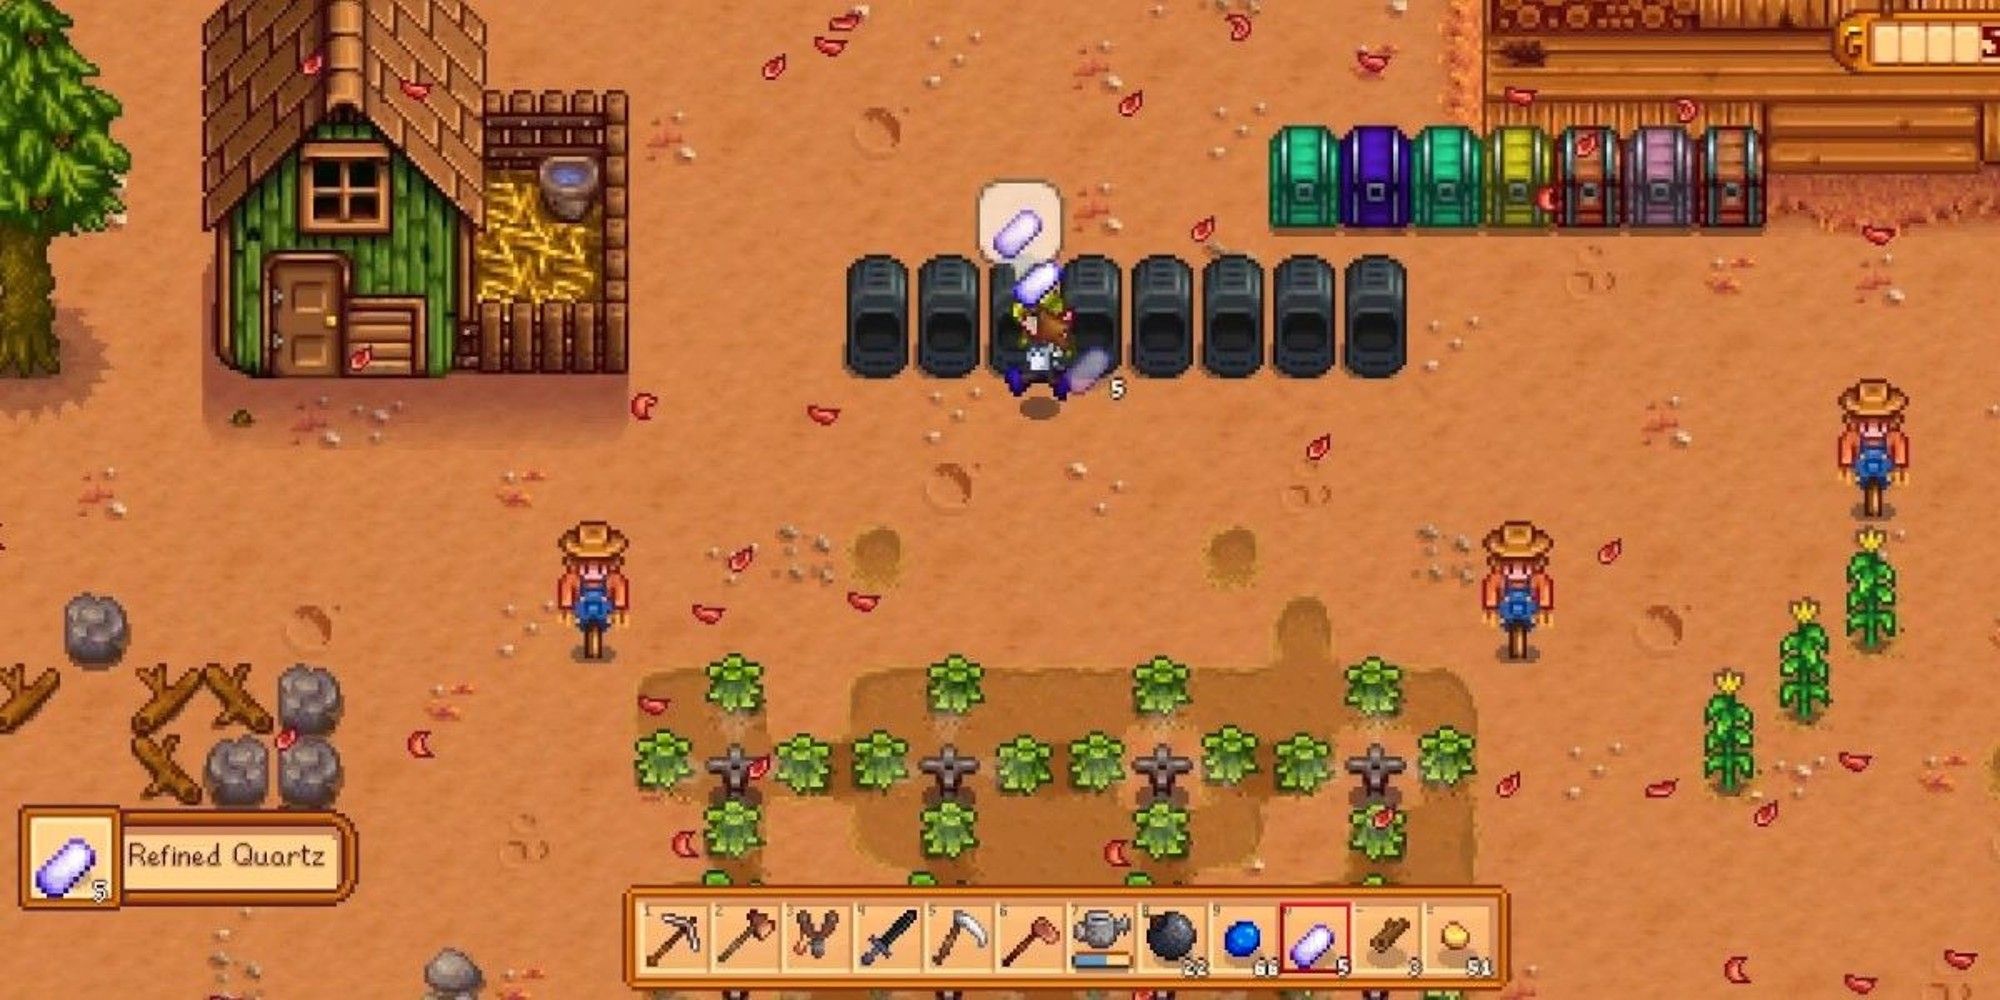 player next to a row of furnaces holding refined quartz